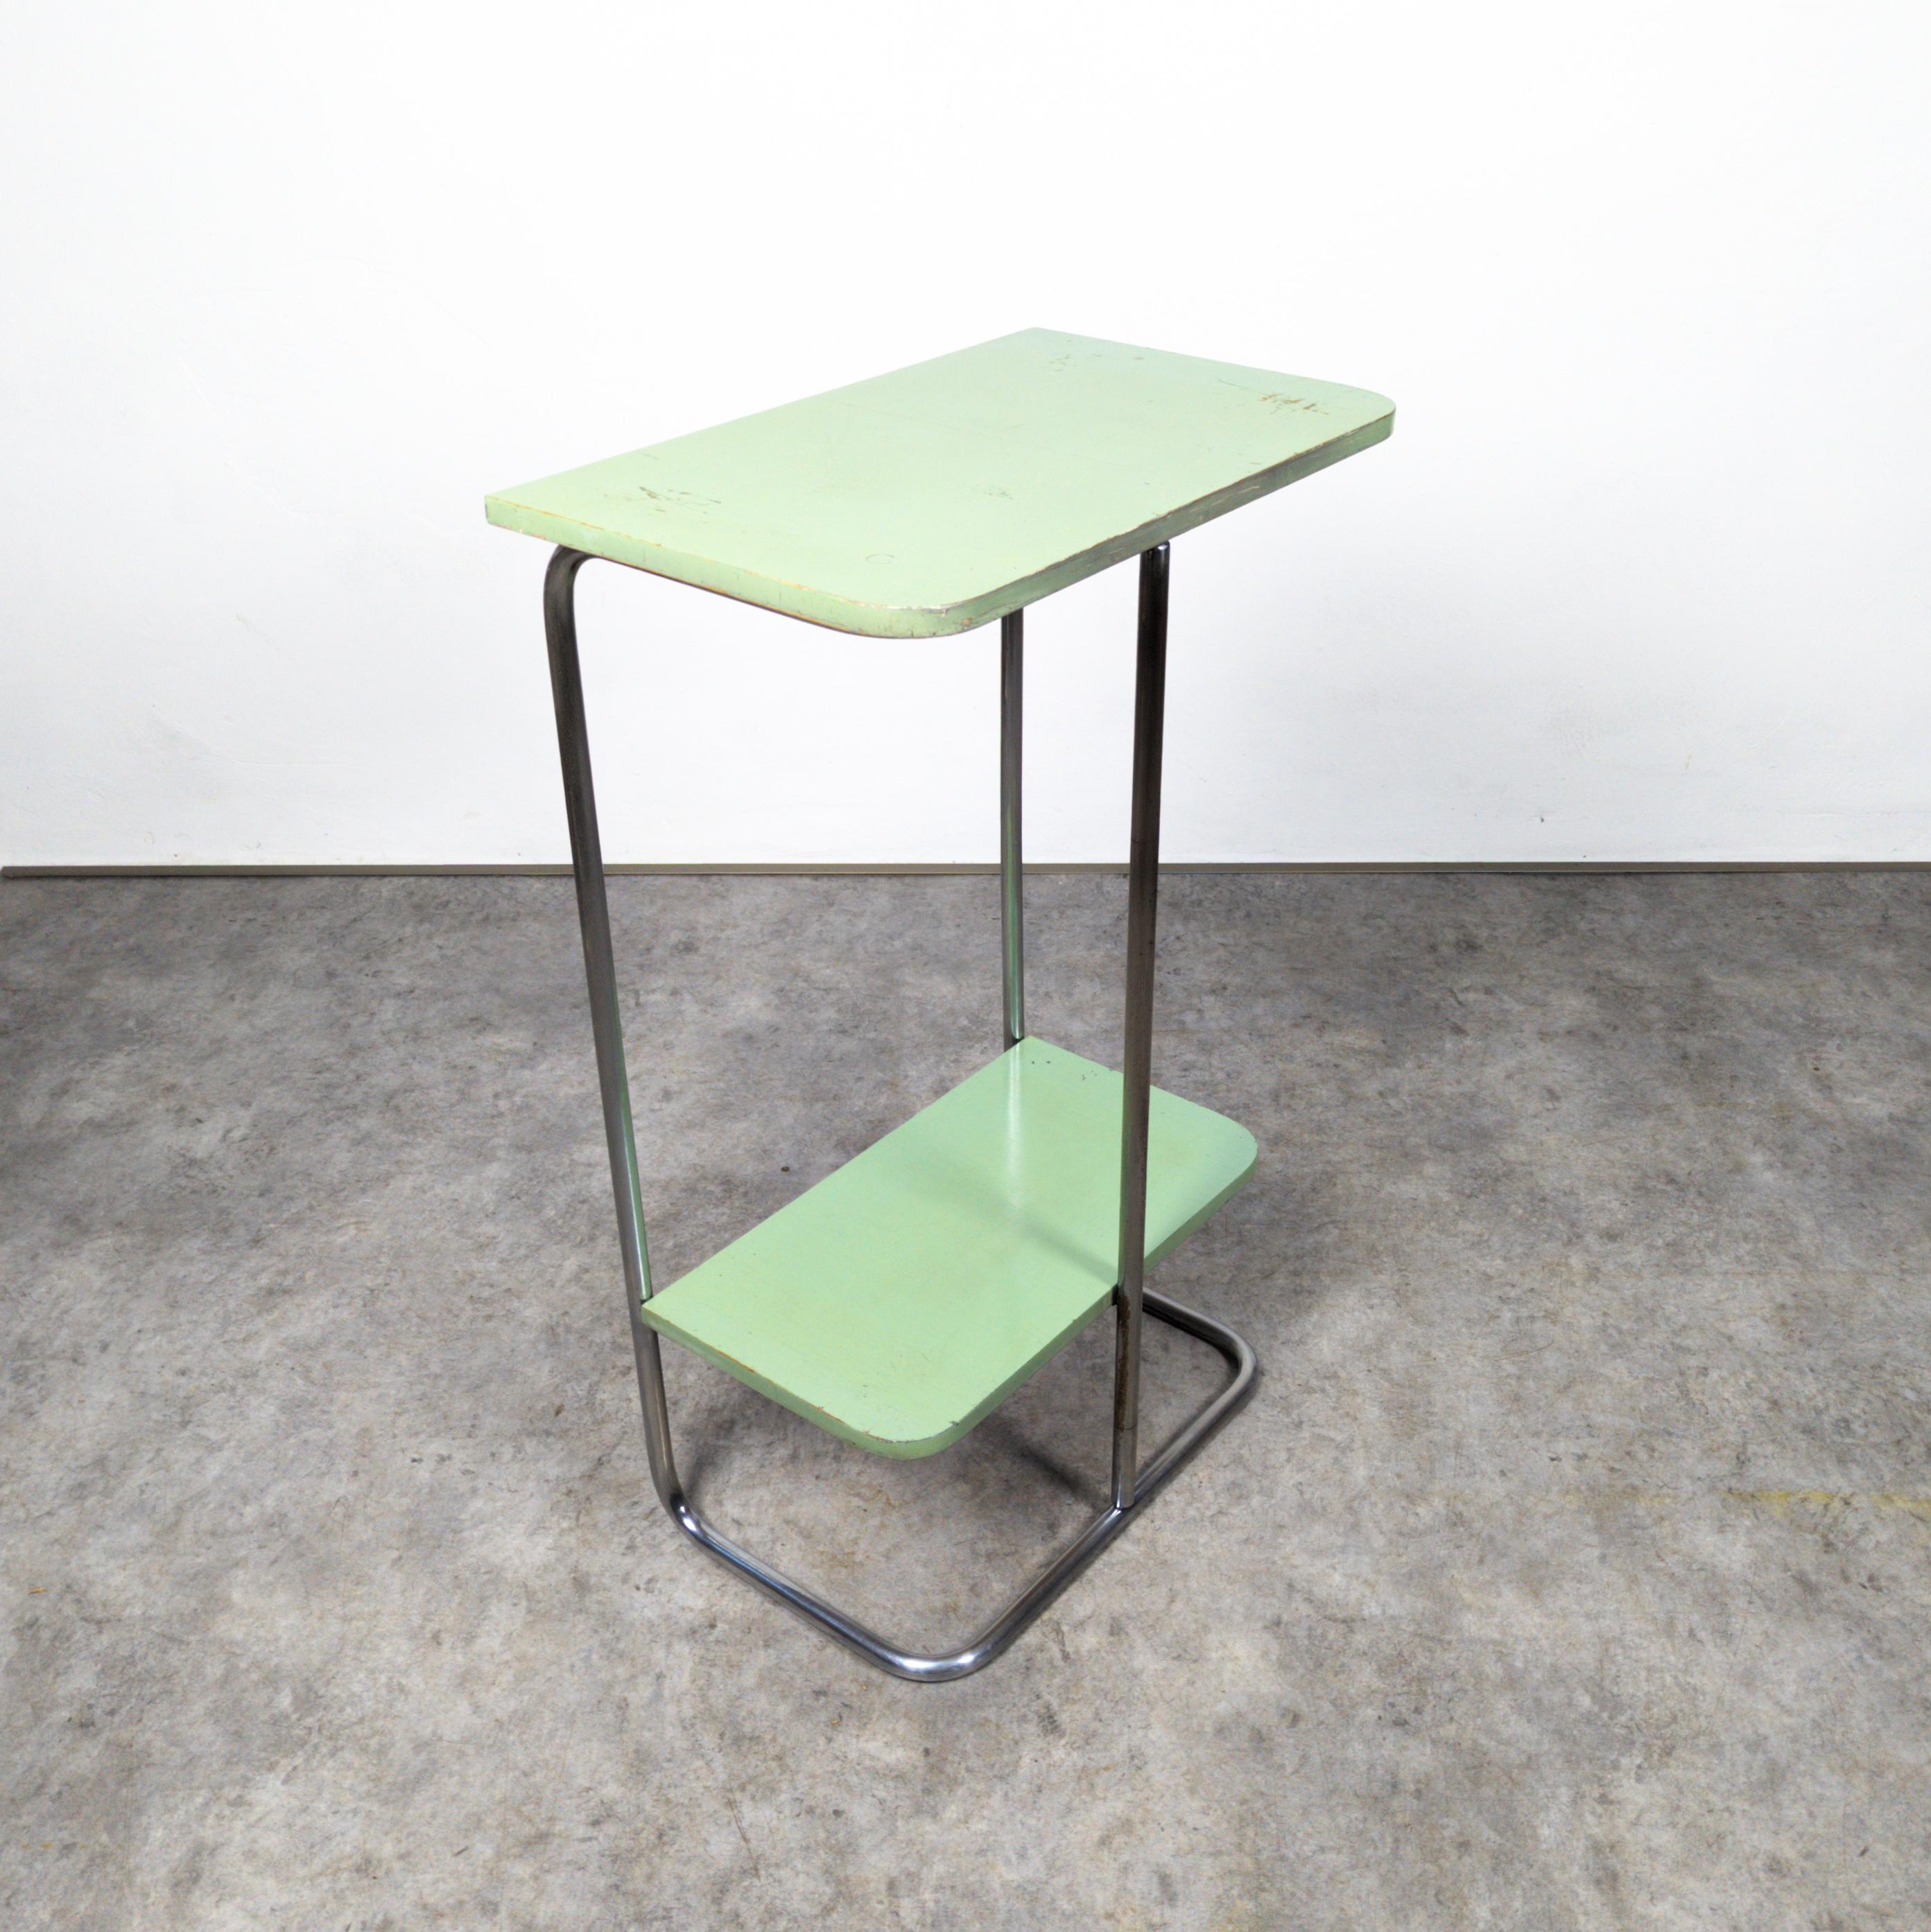 Mid-20th Century Tubular steel console table by Robert Slezák, 1930s. For Sale